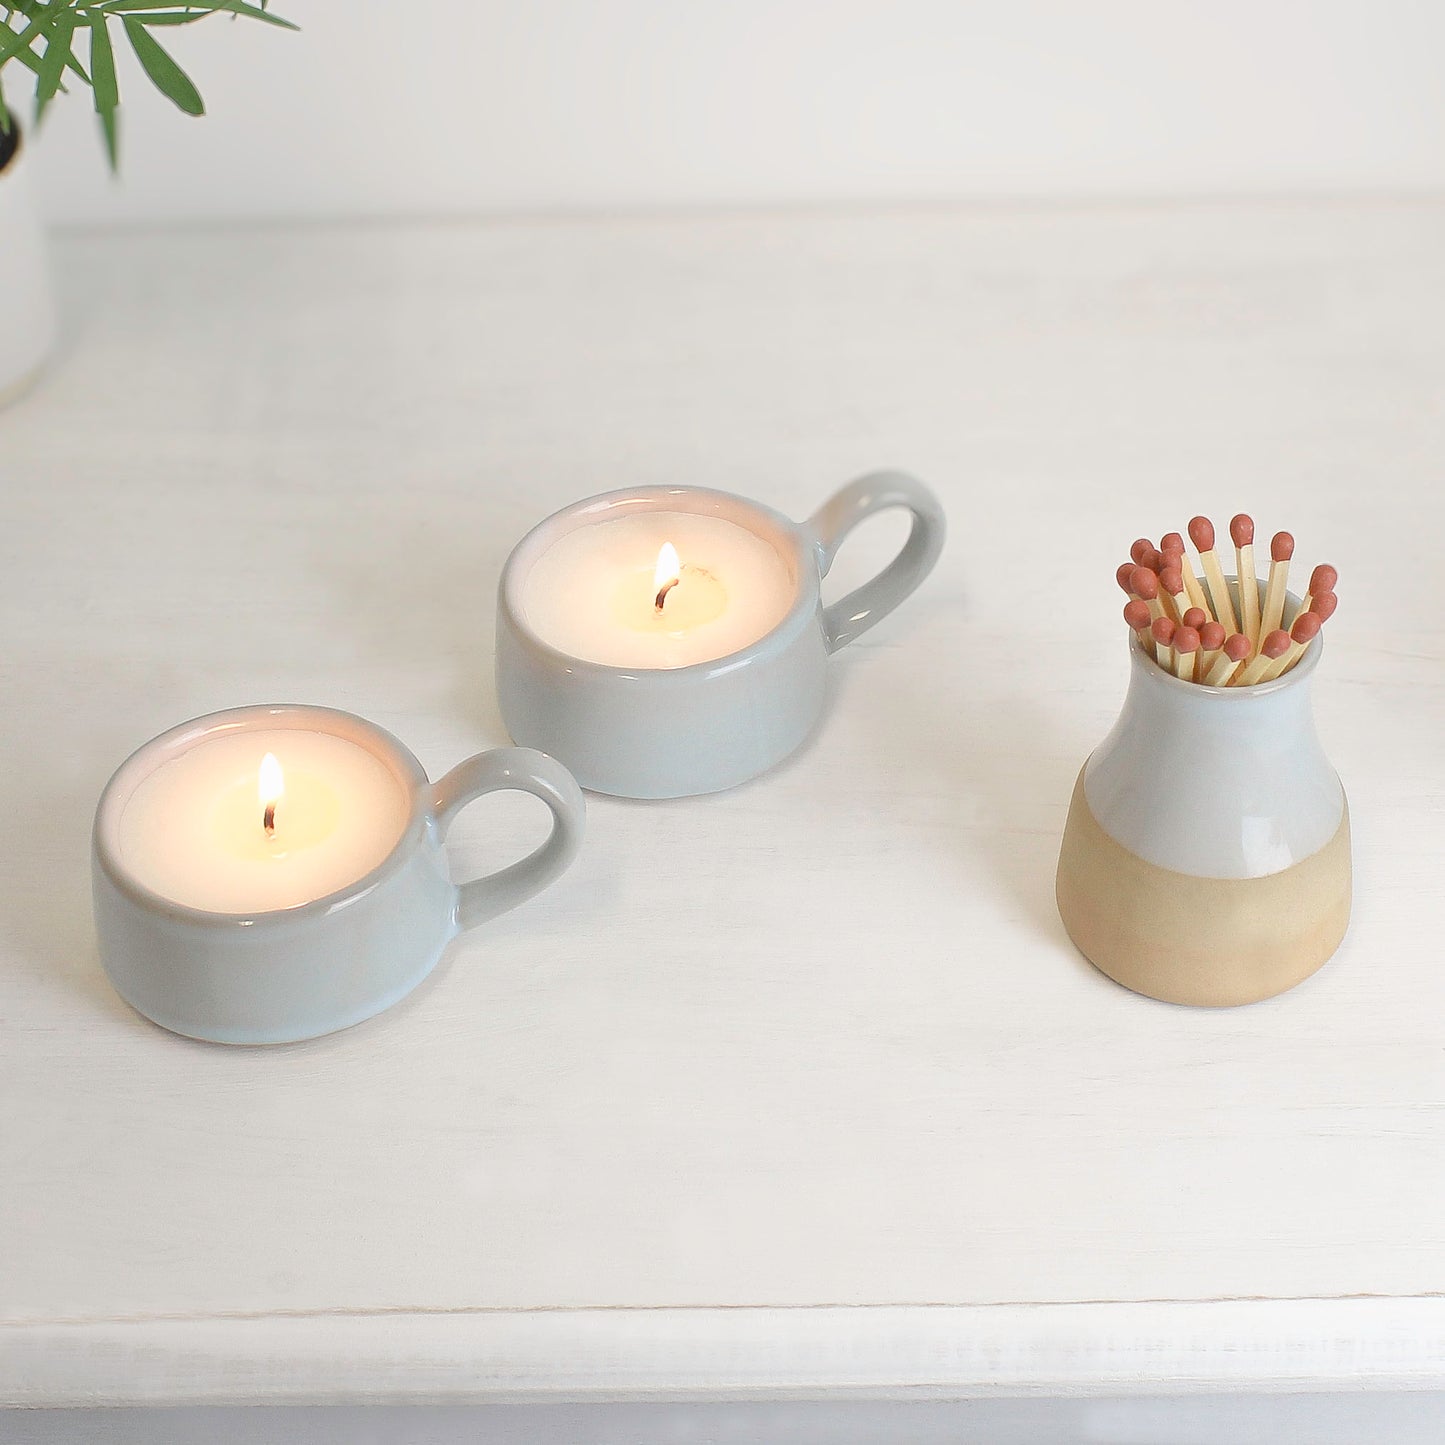 Set of Two Tea light Cup - with Scented Candle